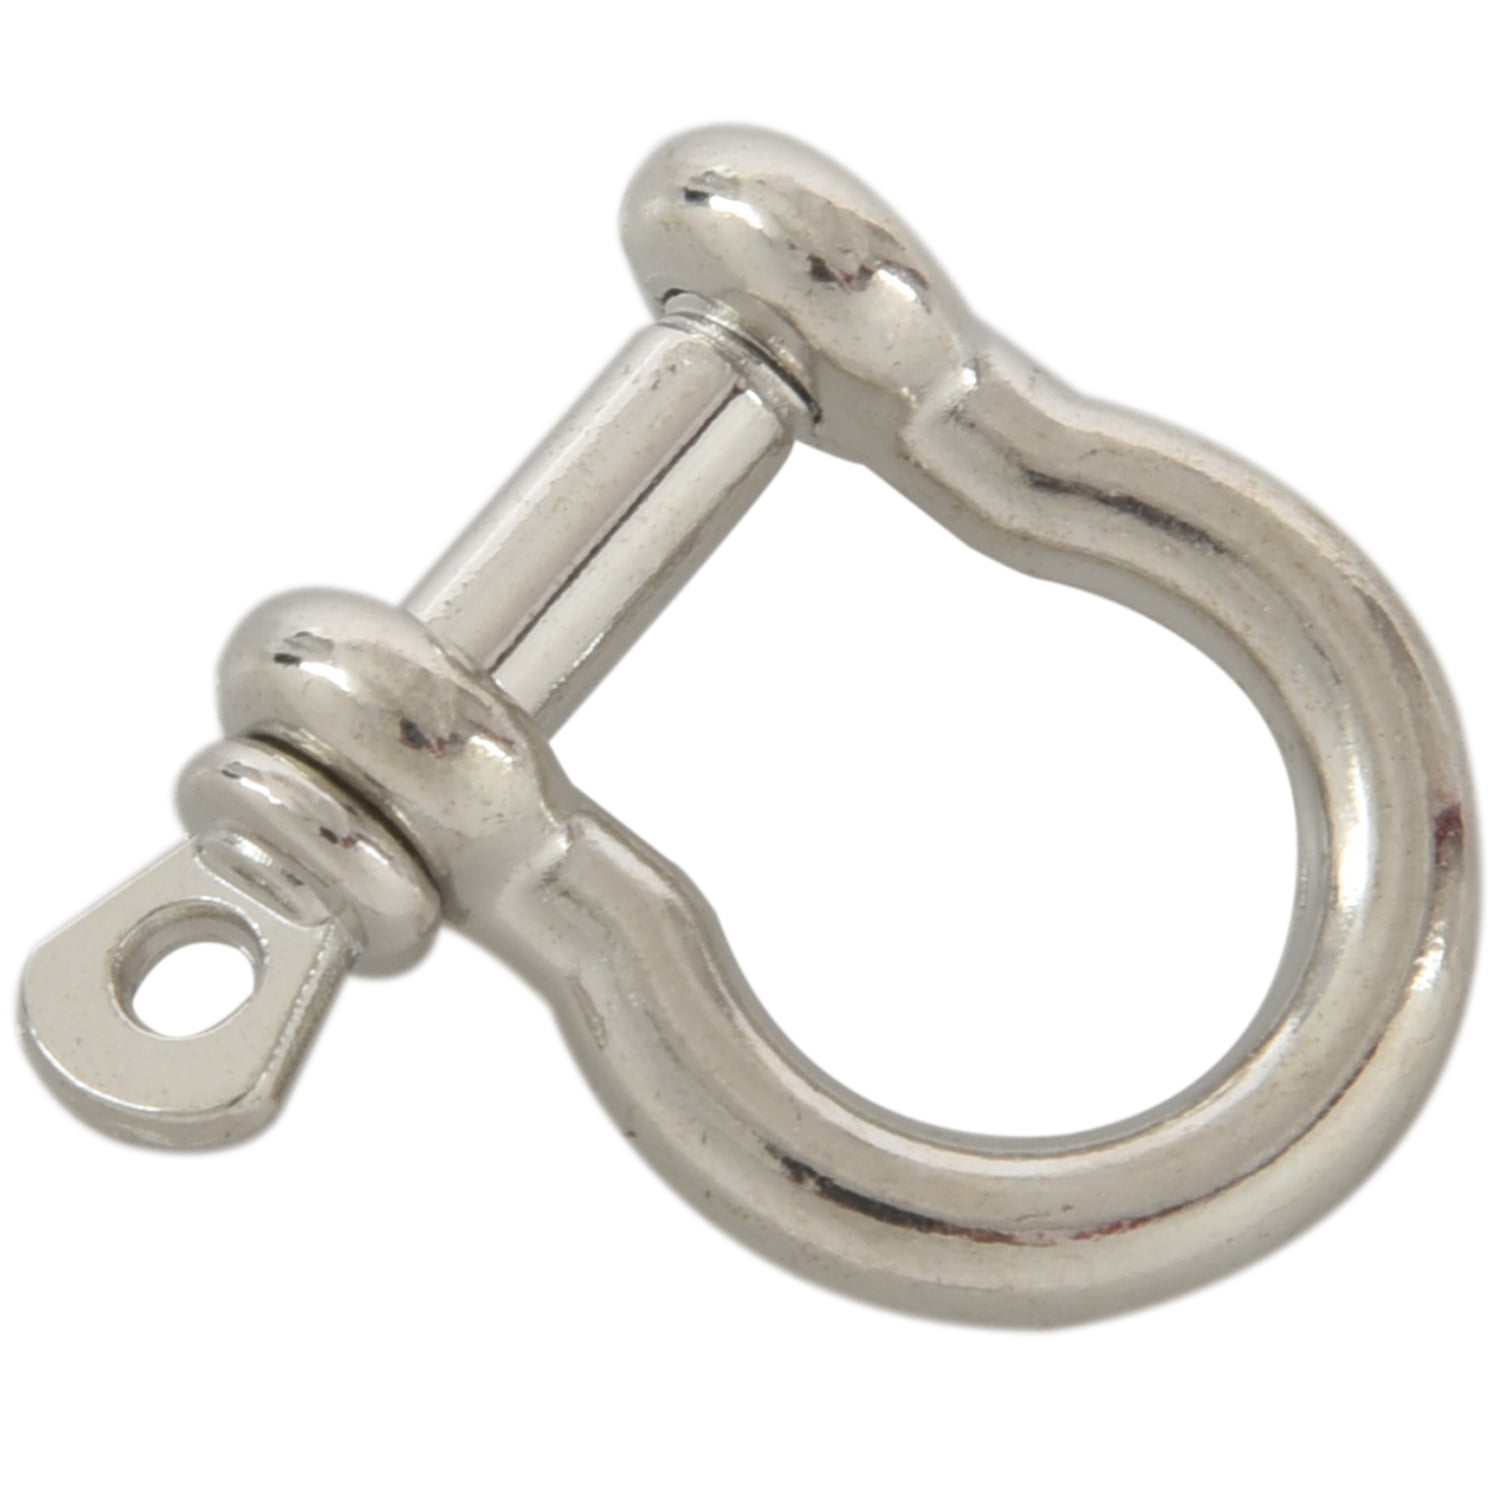 10x O Shape Stainless Steel Anchor Shackle Rope Paracord Bracelet Buckle Kit 